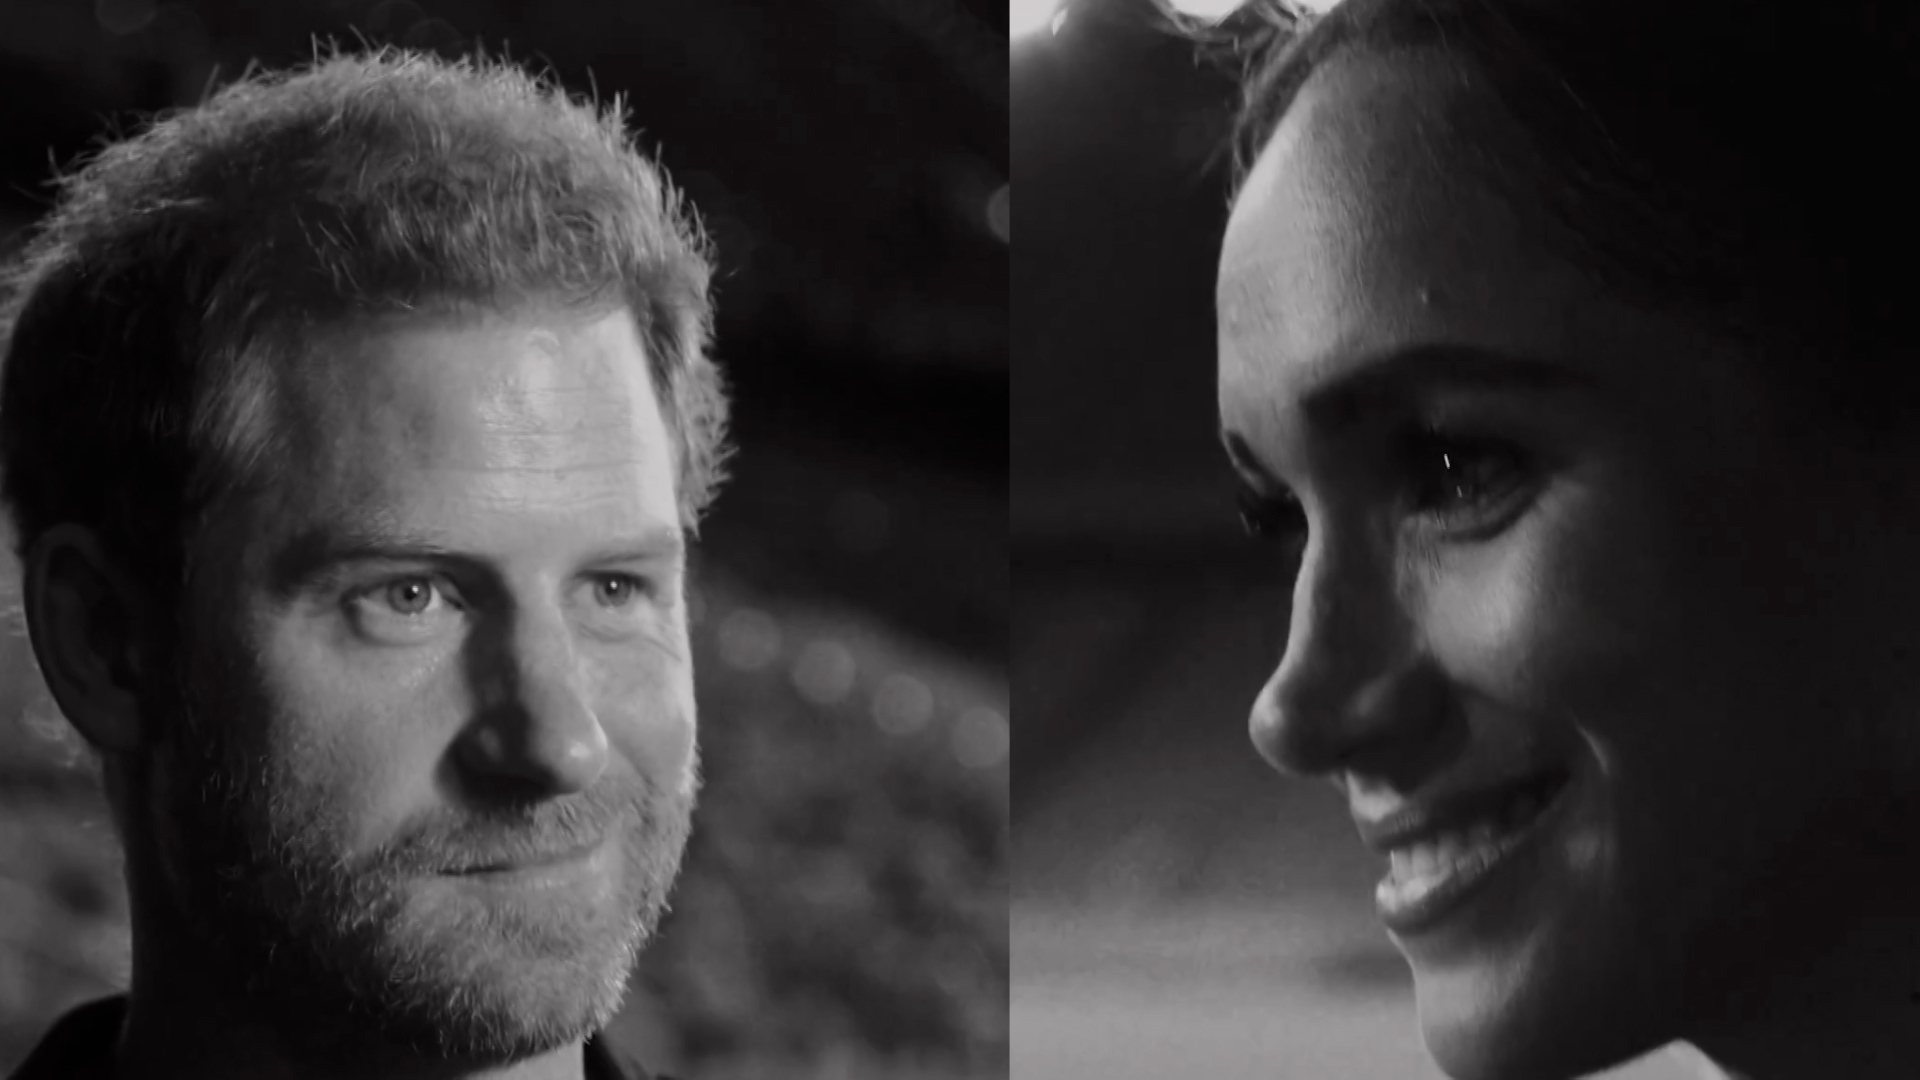 Prince Harry and Meghan Markle go head-to-head in ping-pong match